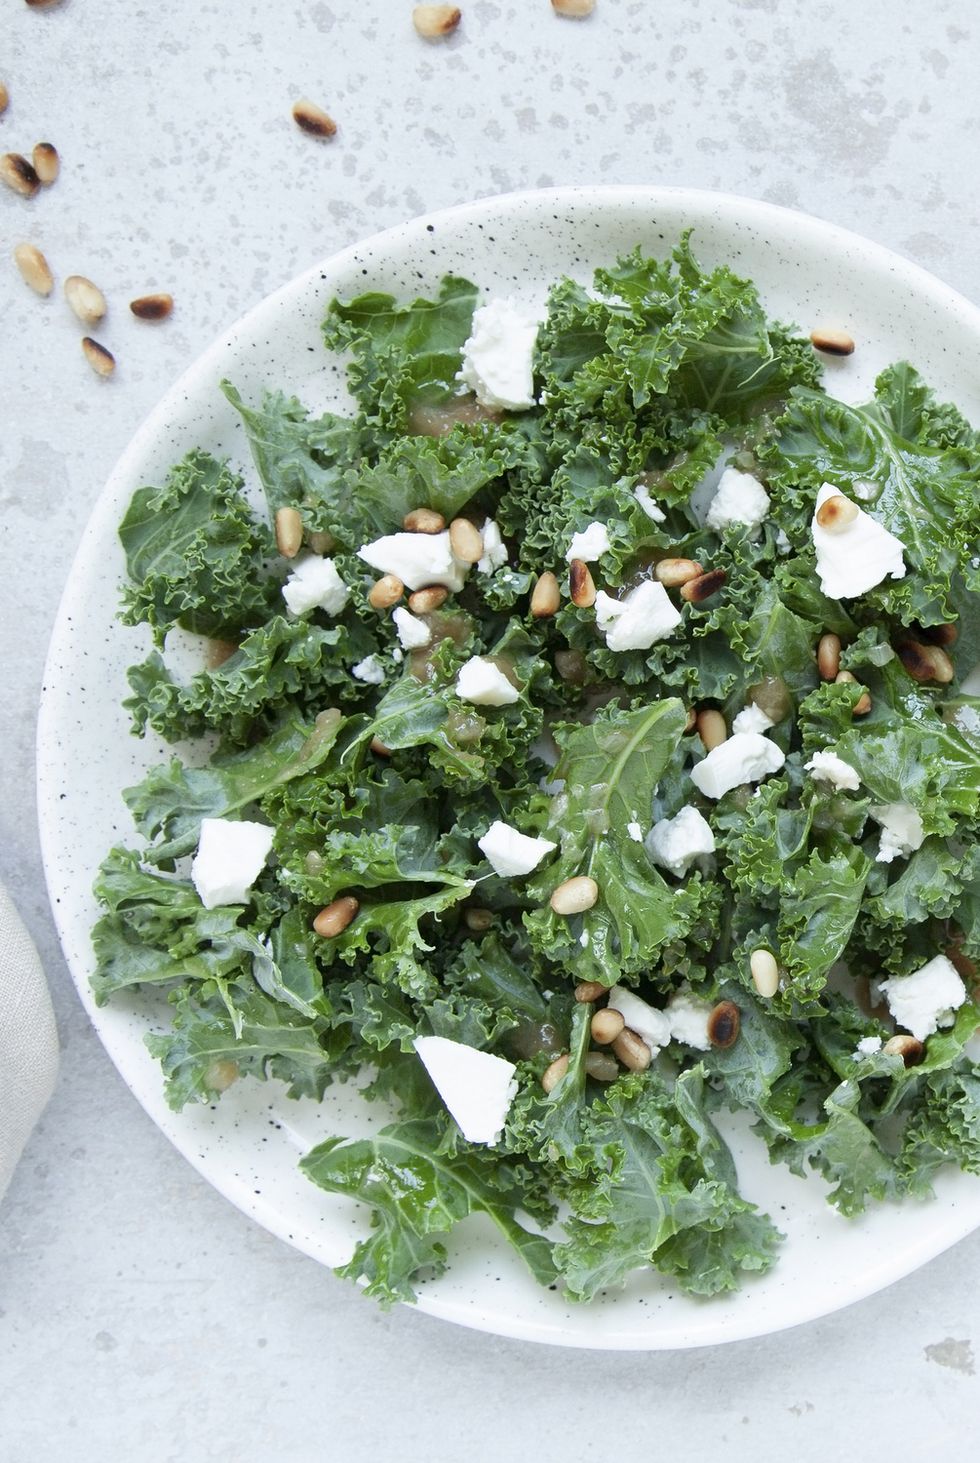 fresh kale salad with goat cheese, pine nuts and sweet balsamic vinegar dressing with onion on grey background